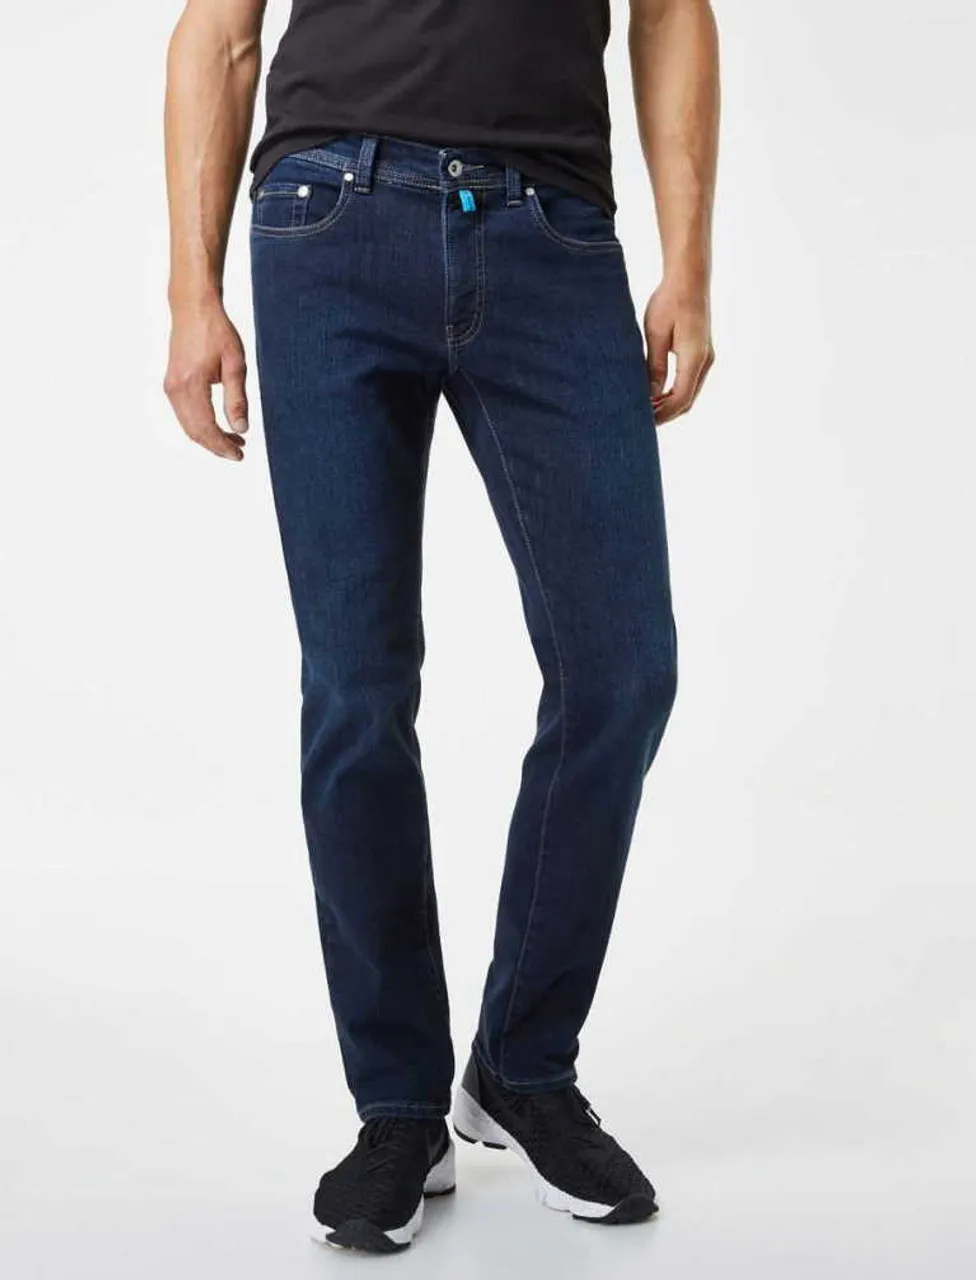 Tapered Leg Jeans Lyon tapered